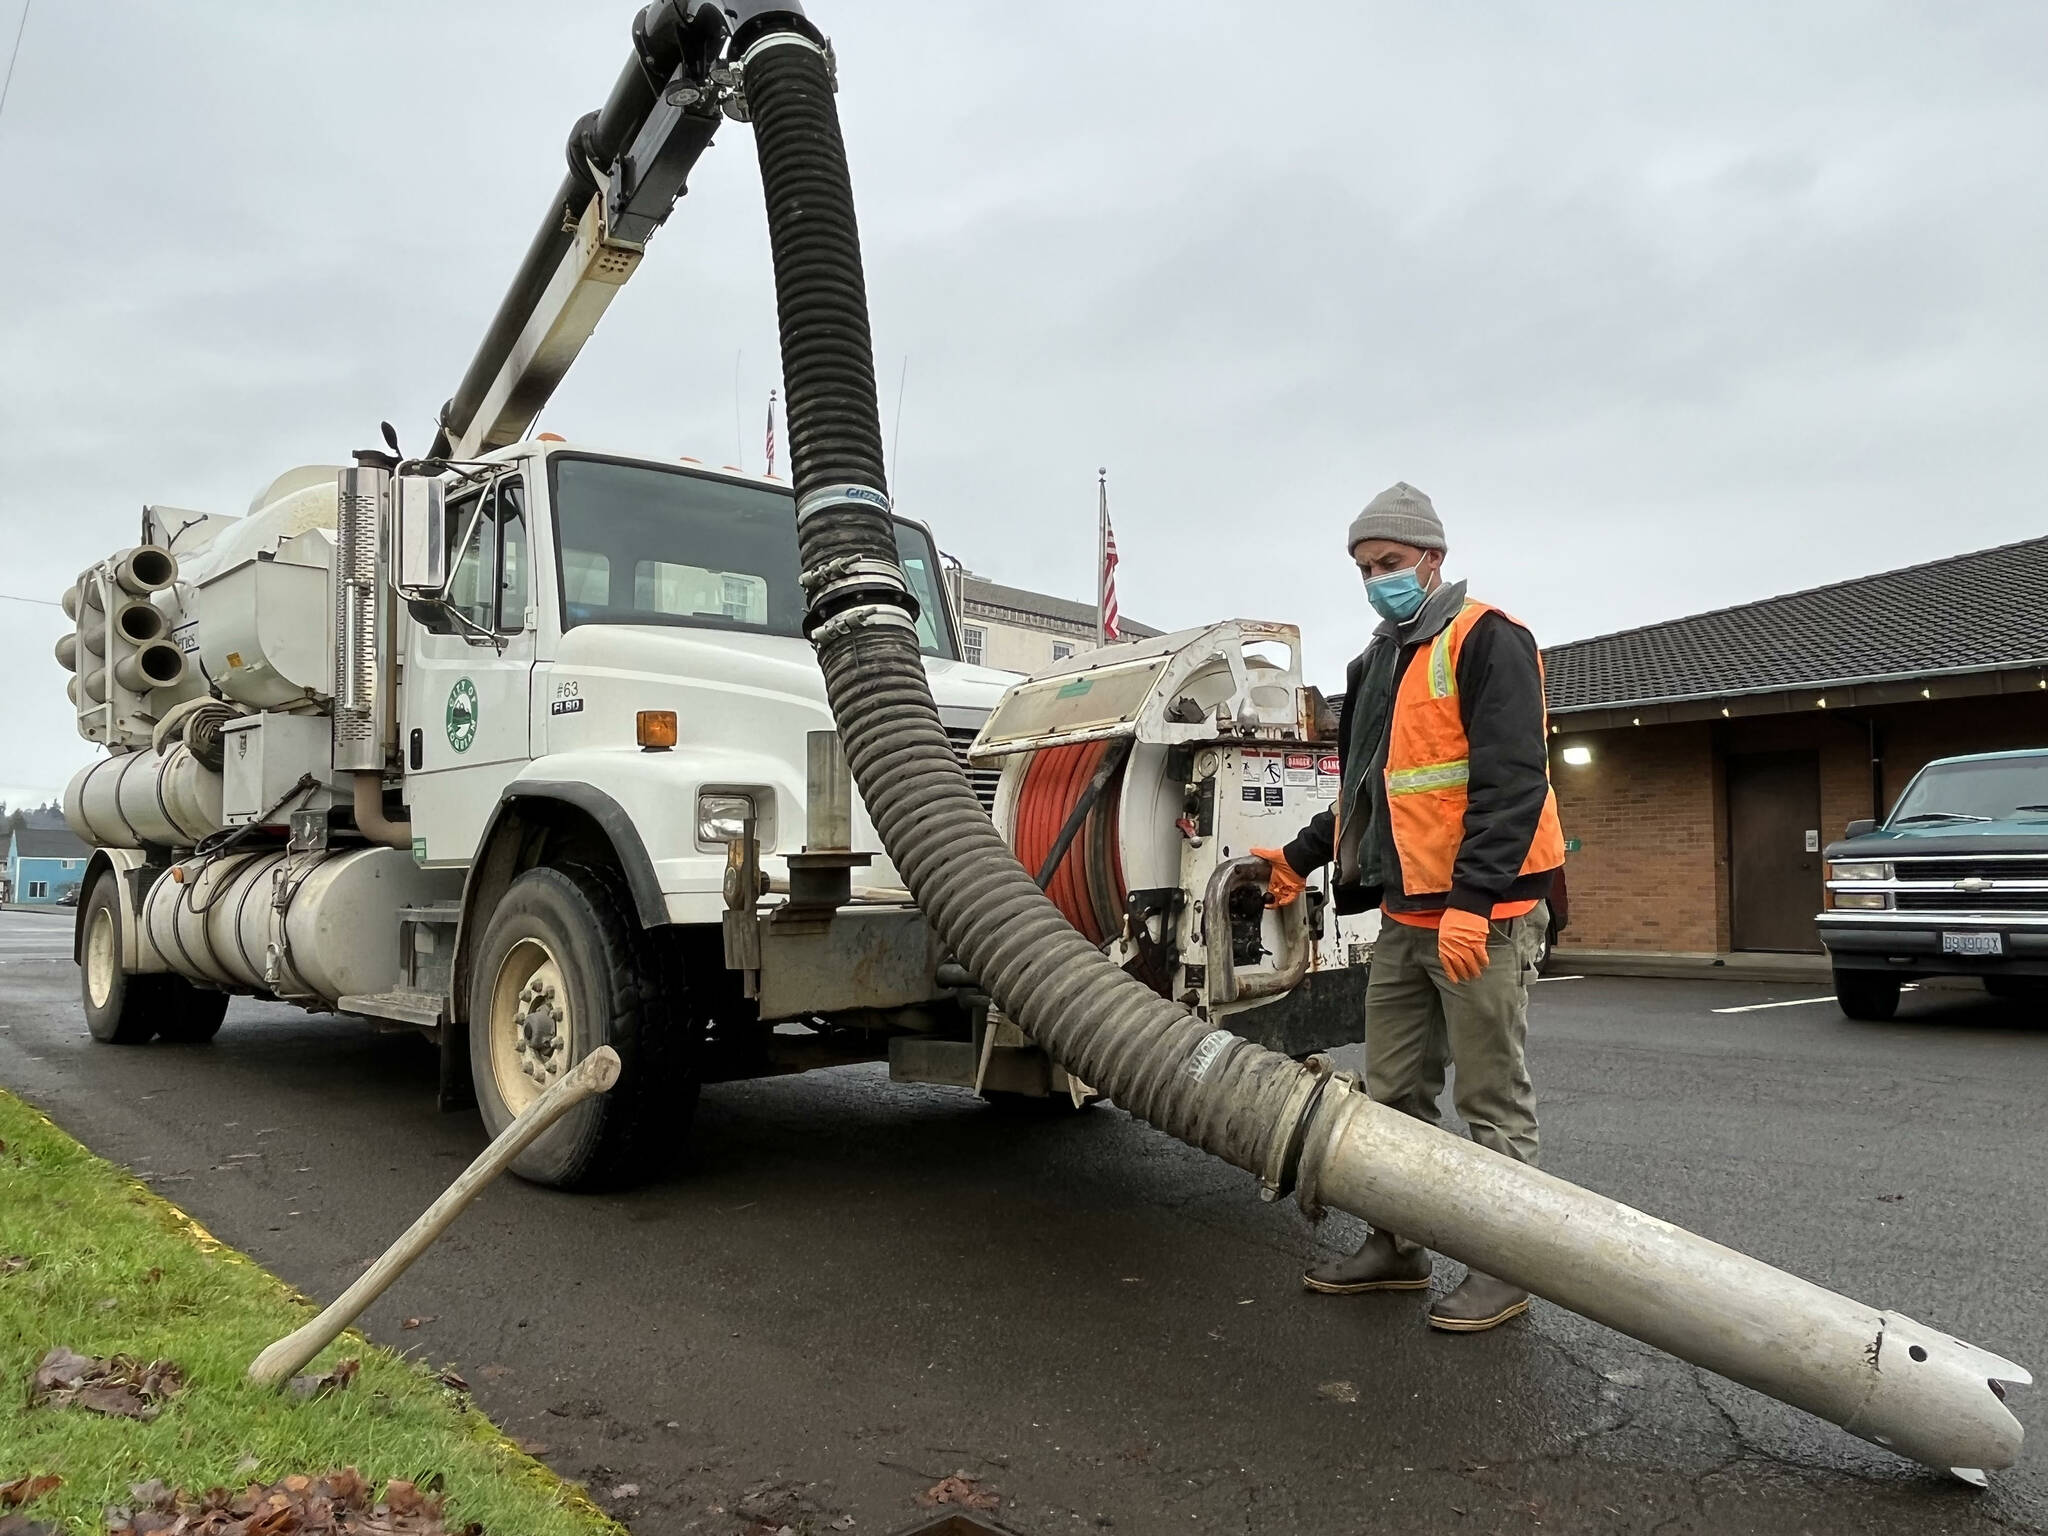 Shane Kohlmeier, operating the City of Hoquiam's Vactor combo truck, said he and his guys use the Vactor truck all the time for different Public Works assignments. (Matthew N. Wells | The Daily World)